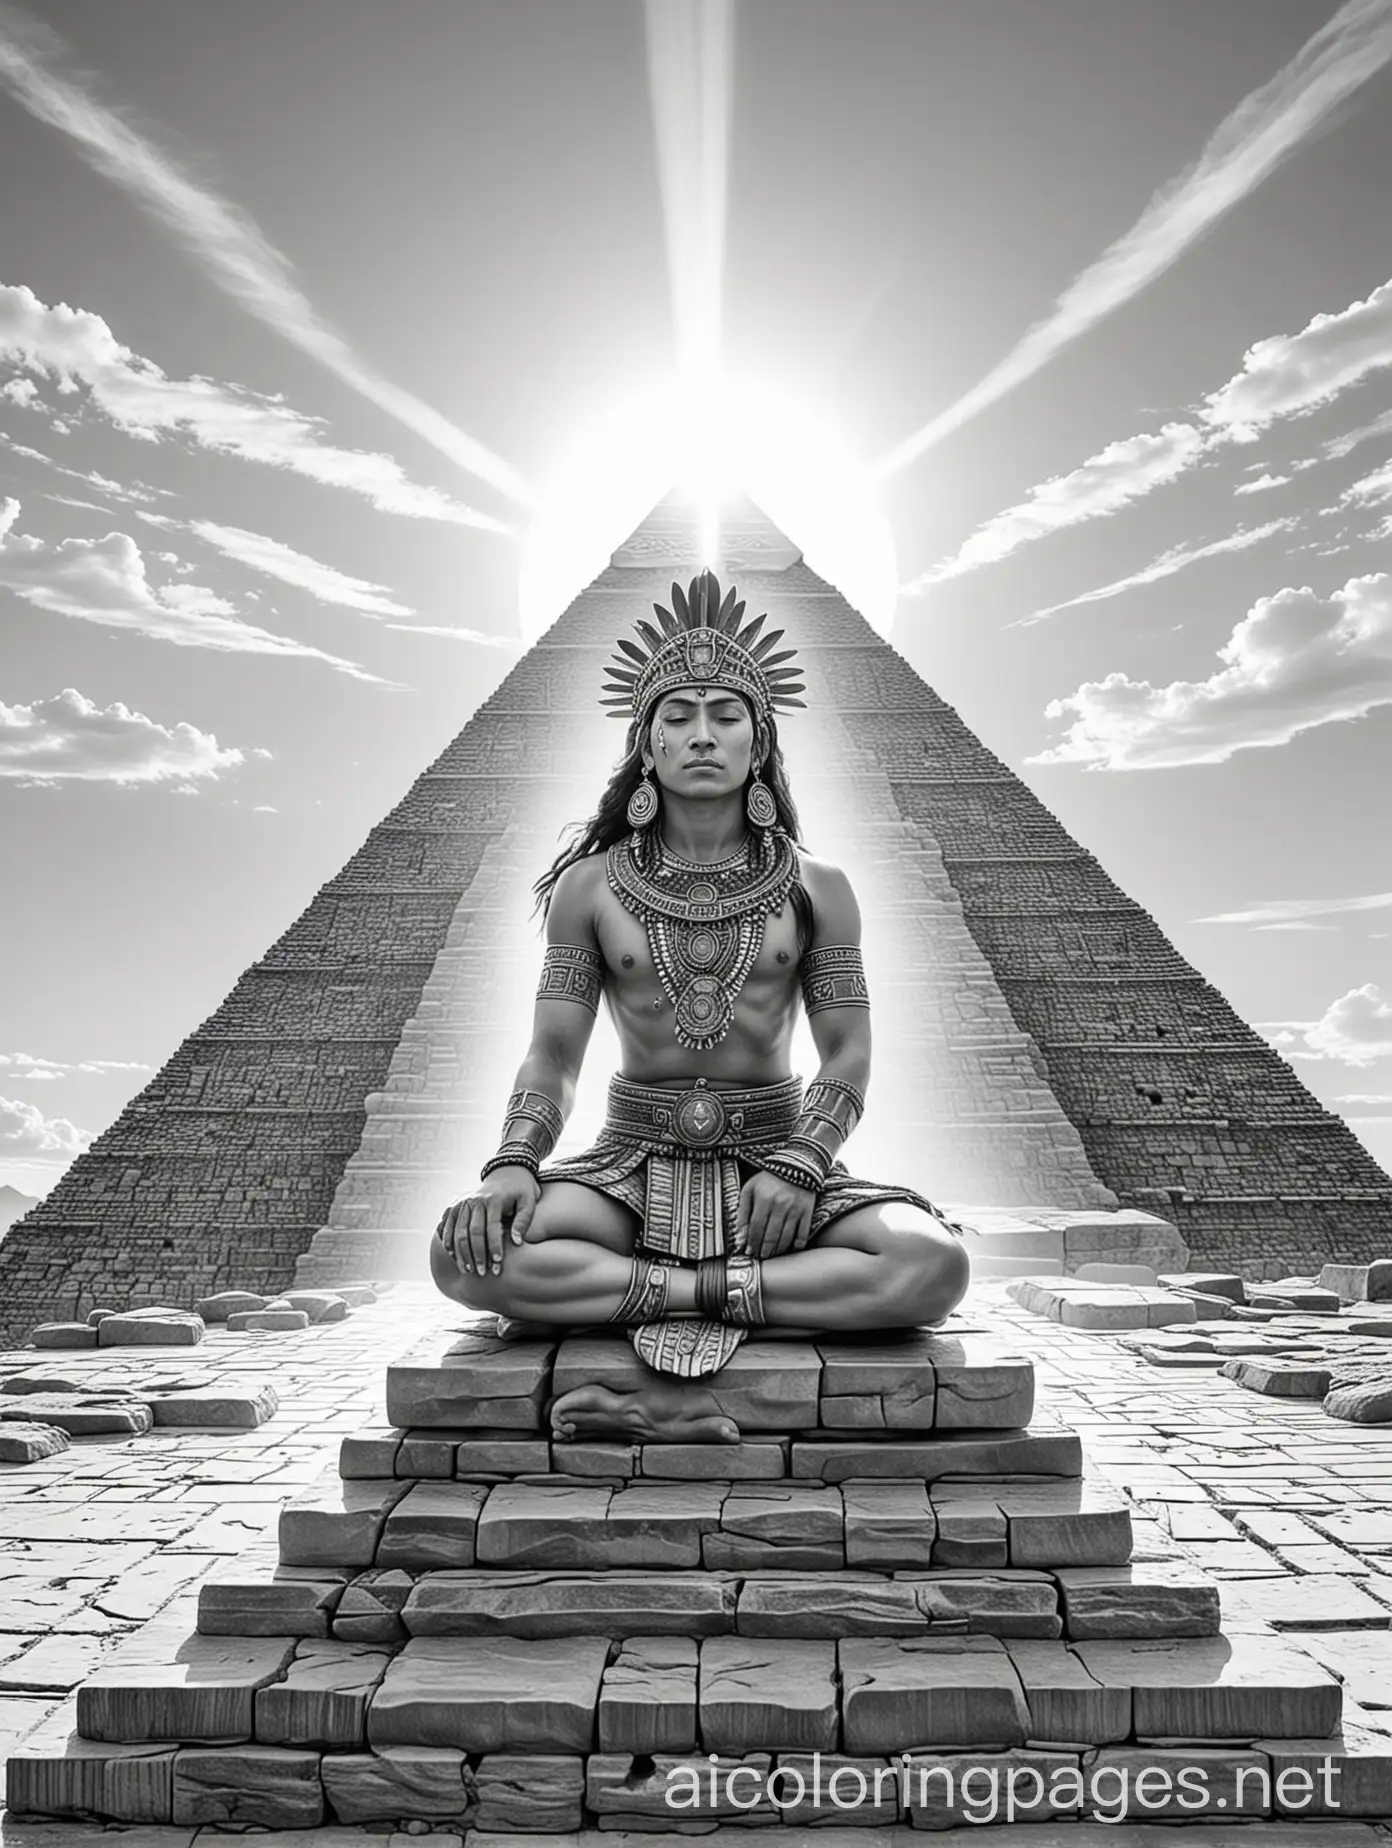  Wide shot of Aztec warrior meditating on top of a pyramid, with the sun shining in the background, Coloring Page, black and white, line art, white background, Simplicity, Ample White Space. The background of the coloring page is plain white to make it easy for young children to color within the lines. The outlines of all the subjects are easy to distinguish, making it simple for kids to color without too much difficulty. (The input is already in English, so no translation is needed.)